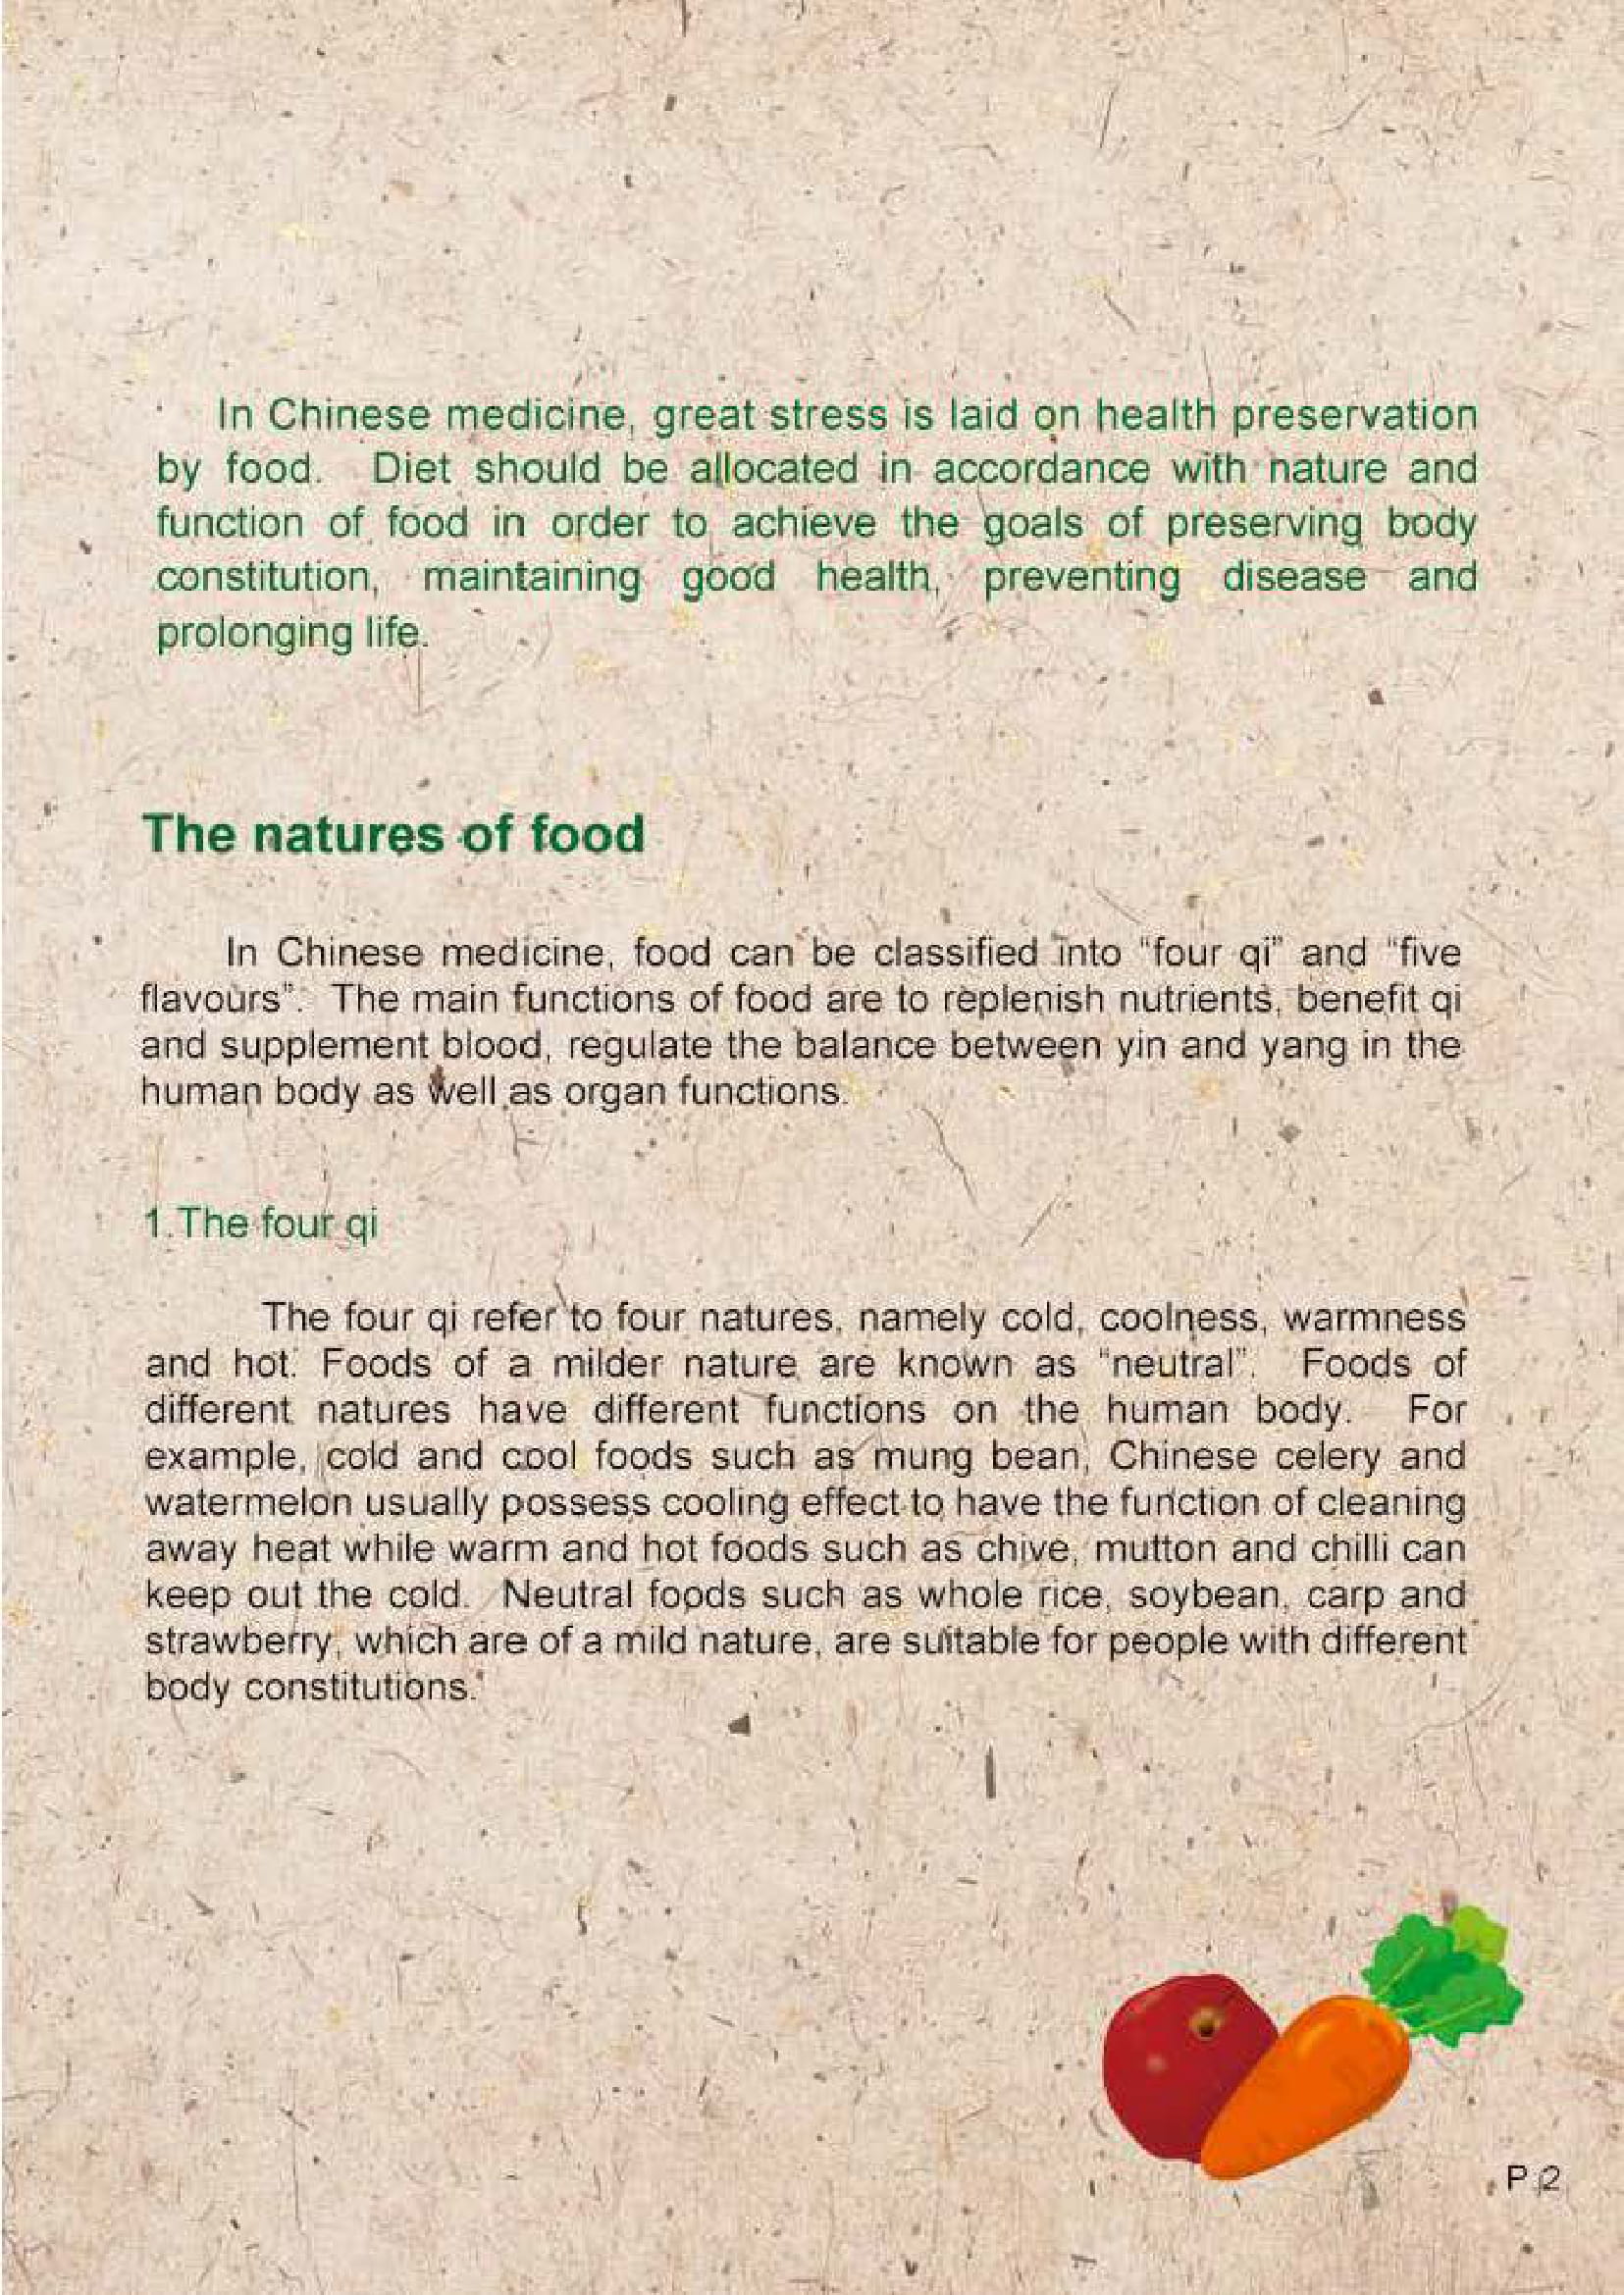 This picture demonstrates page 2 of the publication entitled "Health preservation by food in Chinese medicine – The five cereals, fruits and vegetables"